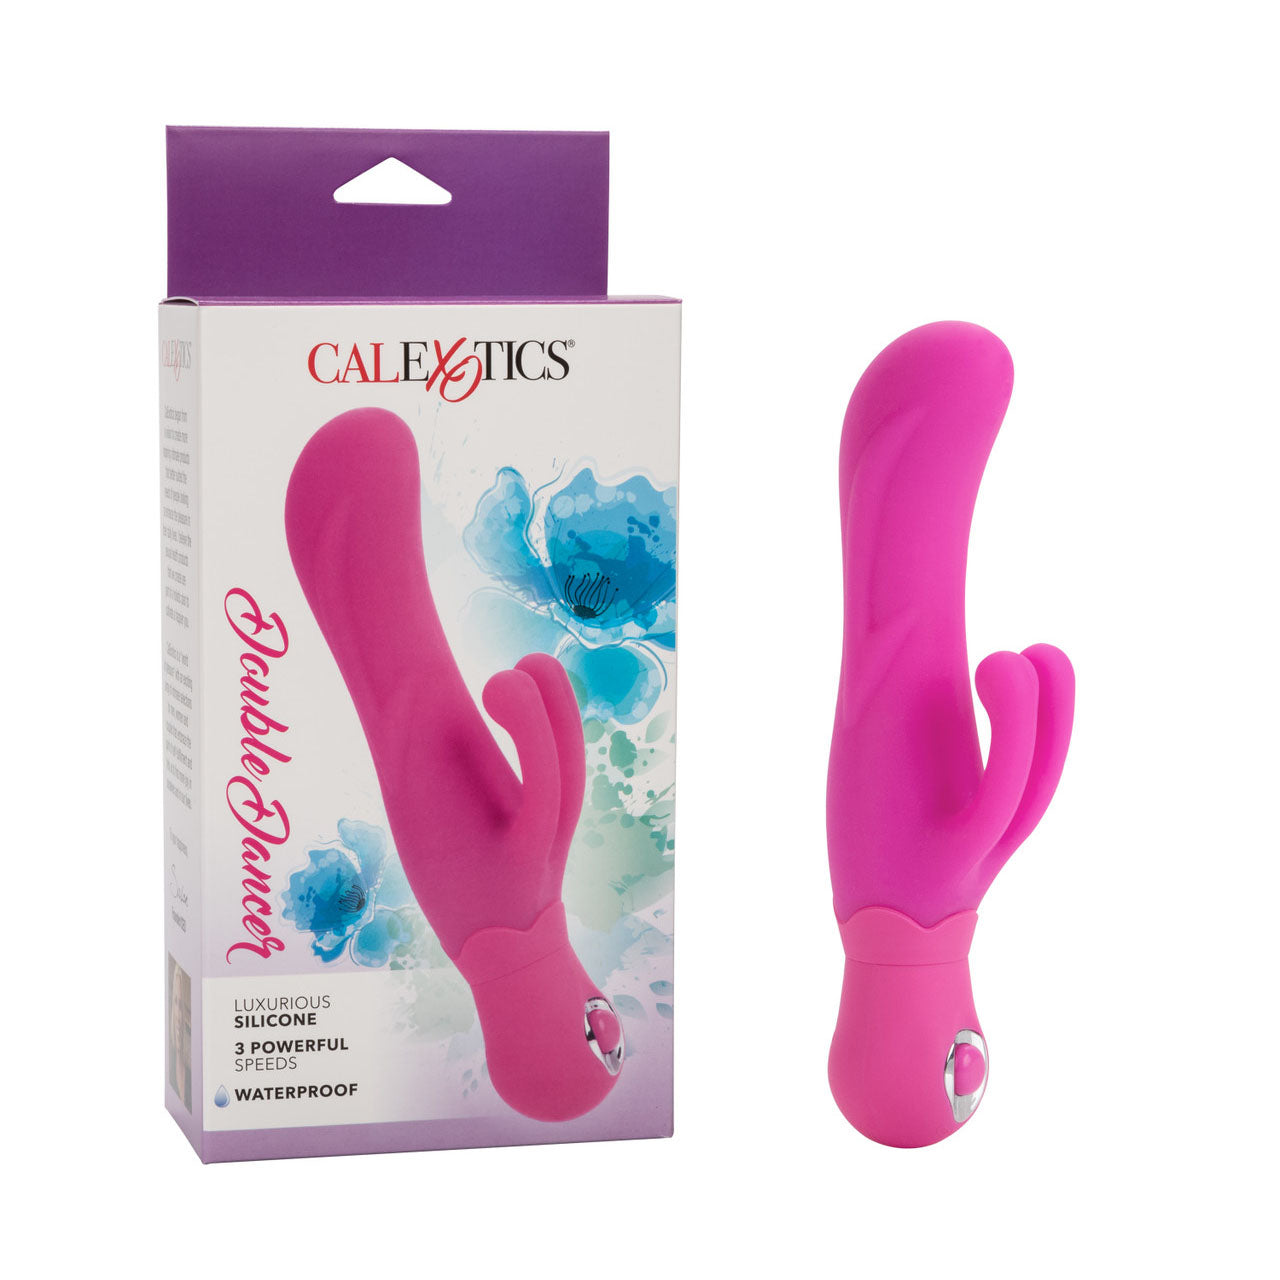 Posh Silicone Double Dancer G-Spot Vibe - Pink